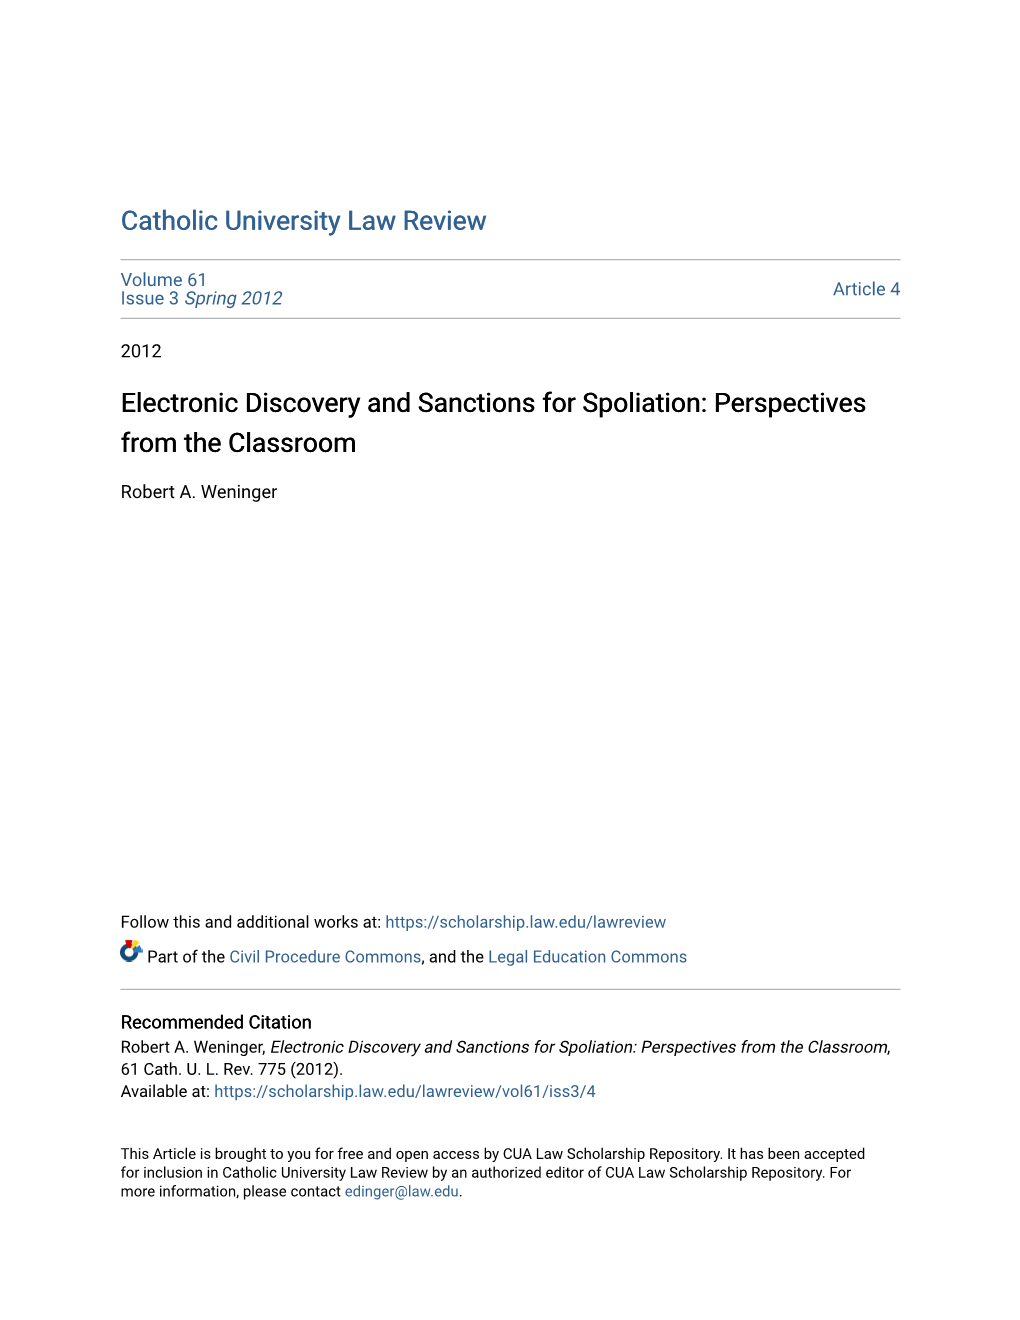 Electronic Discovery and Sanctions for Spoliation: Perspectives from the Classroom